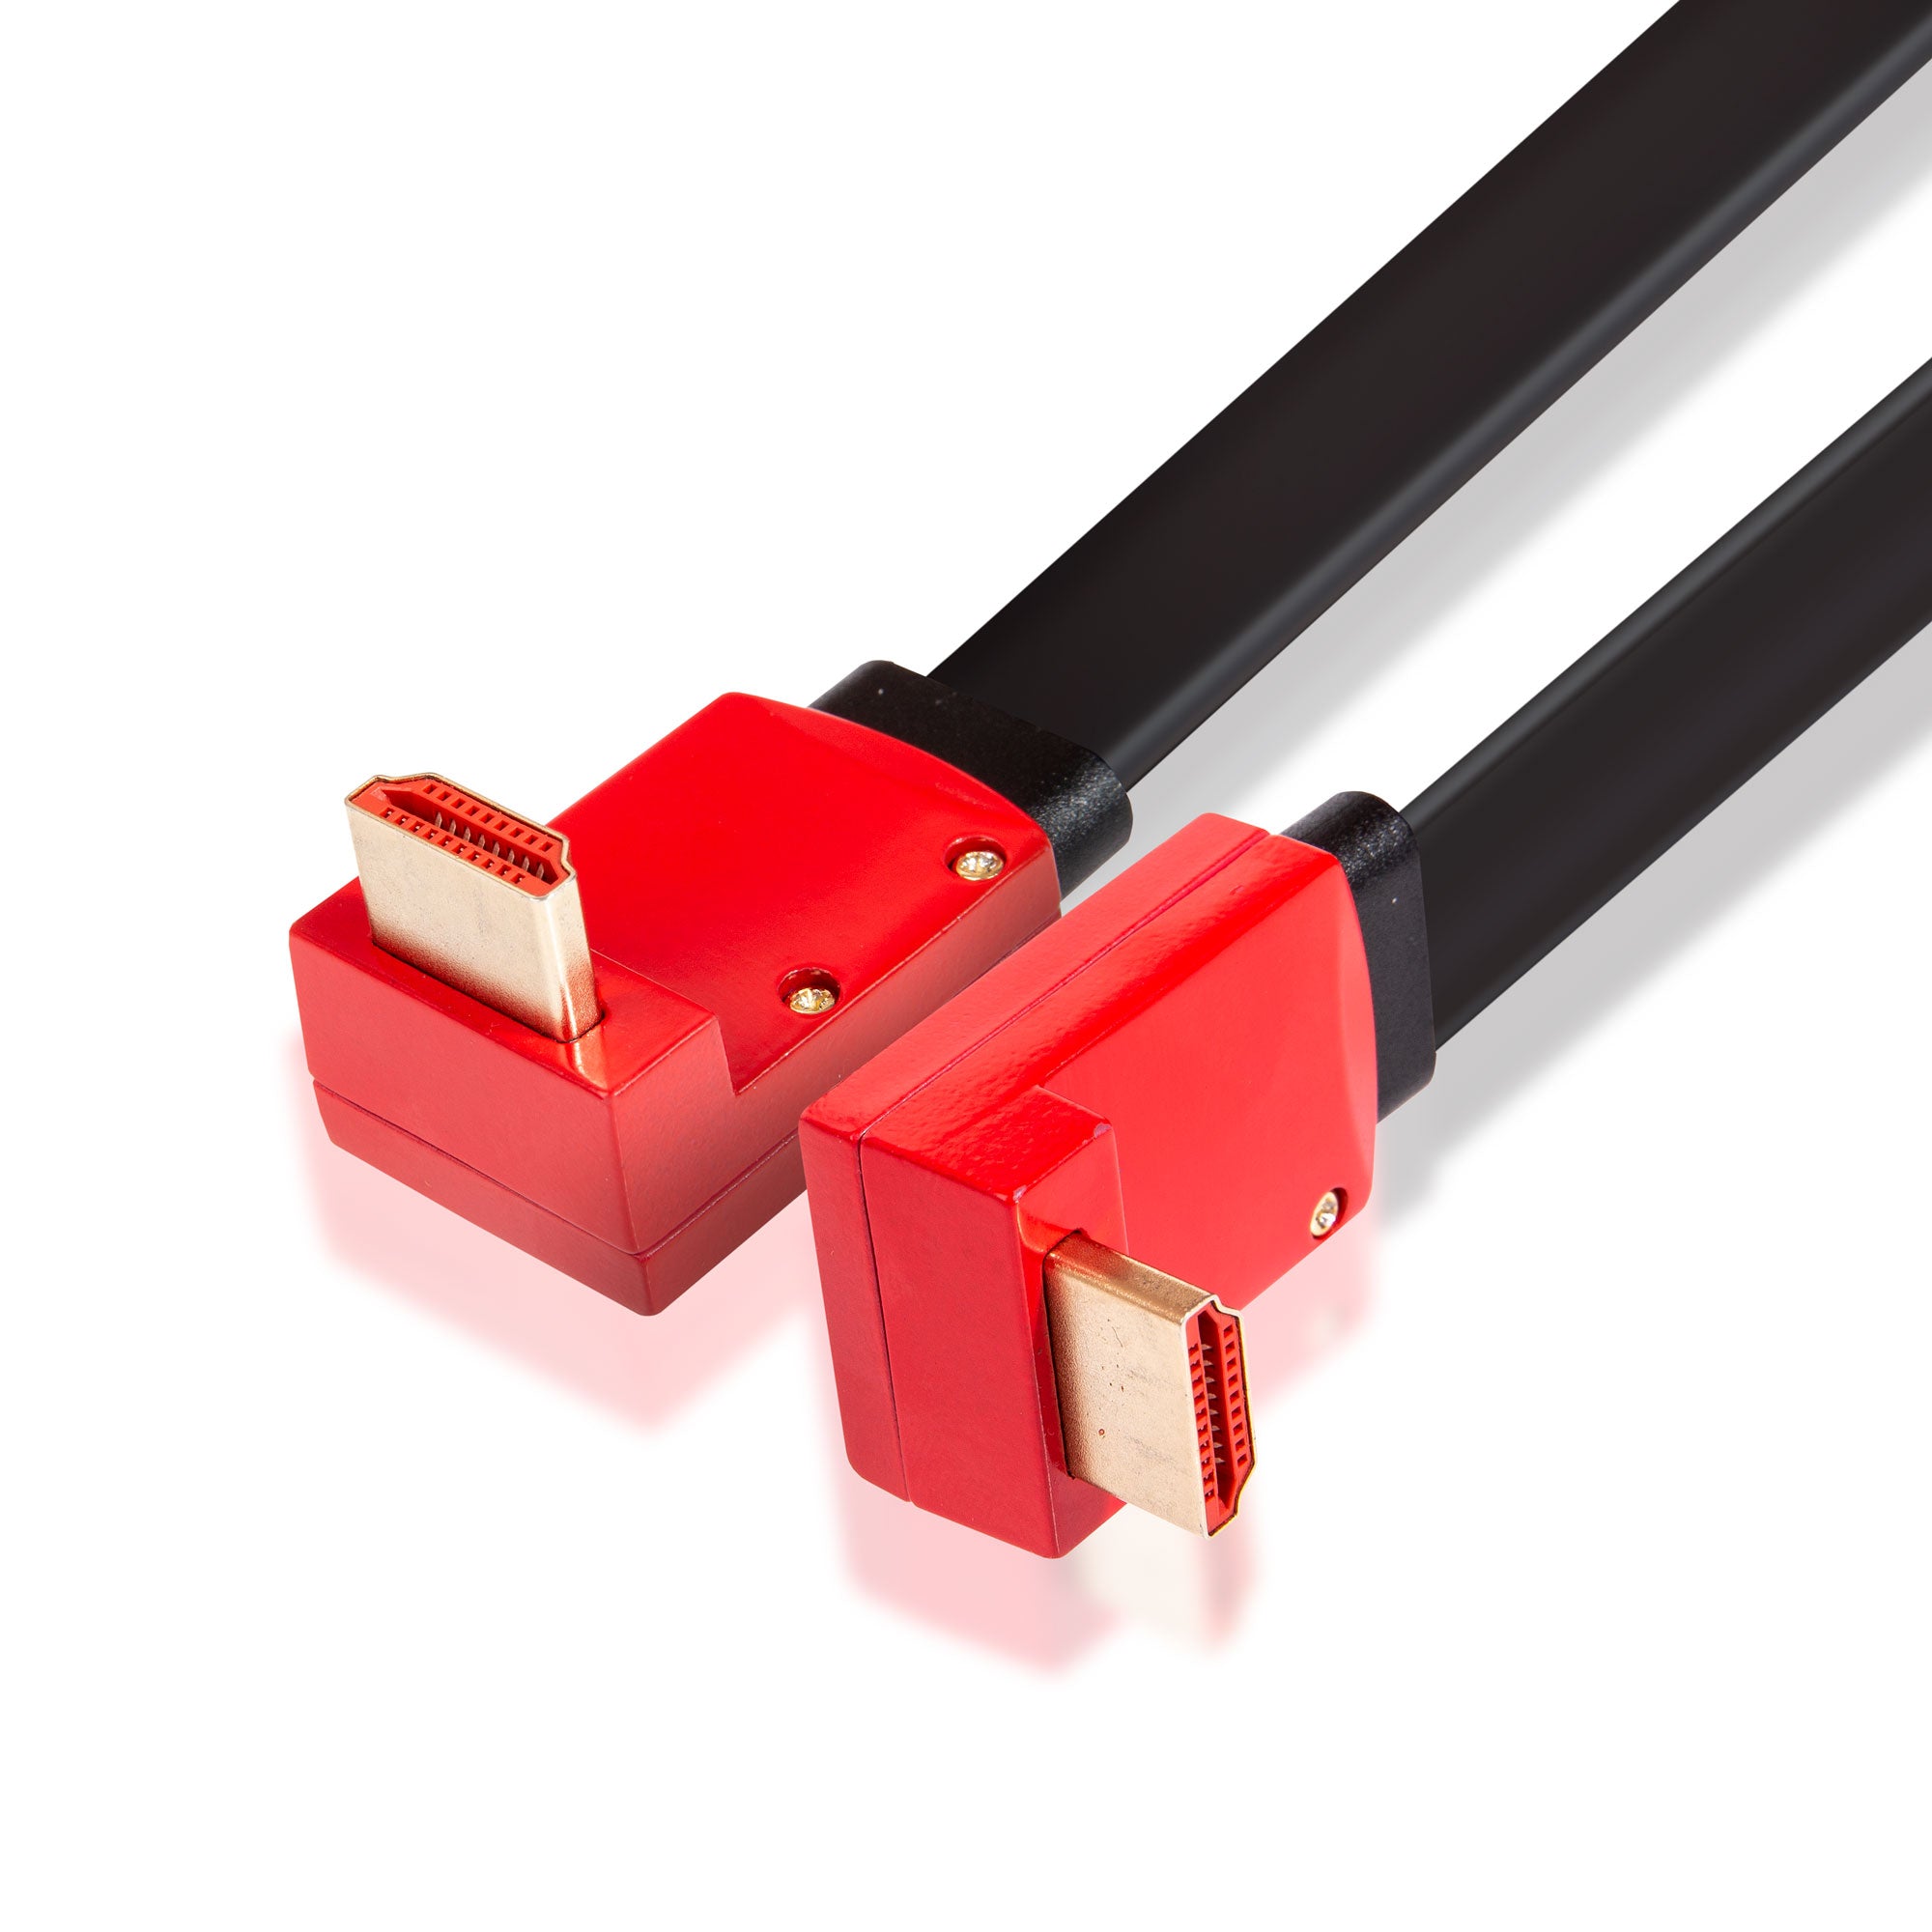 Flat HDMI v2.0 4k 60fps Ultra HD High Speed Cable HDR Graphics, Angled Connectors